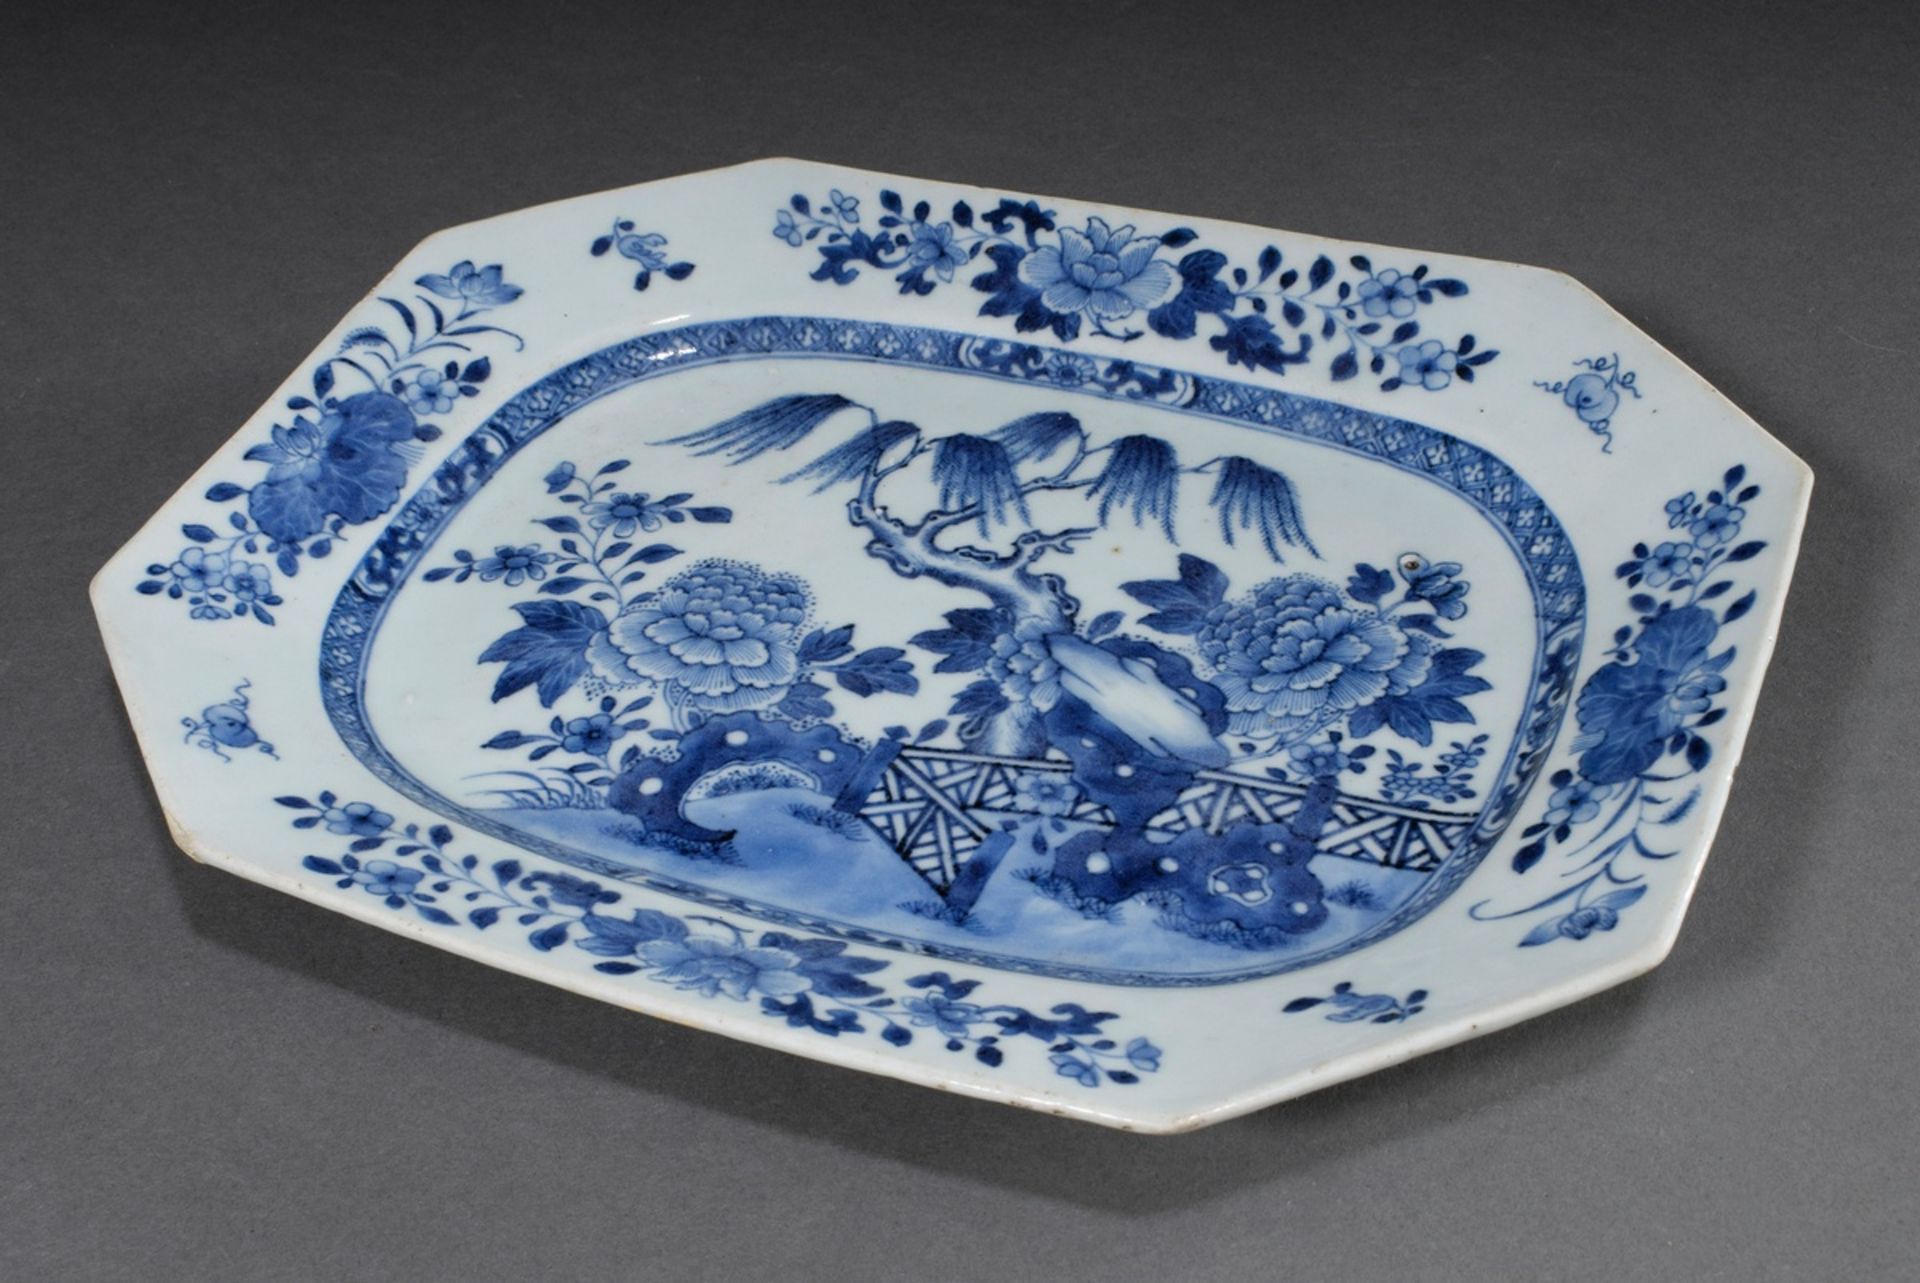 Octagonal plate with blue painting decoration "Garden", Qianlong period, China mid 18th century, 3,